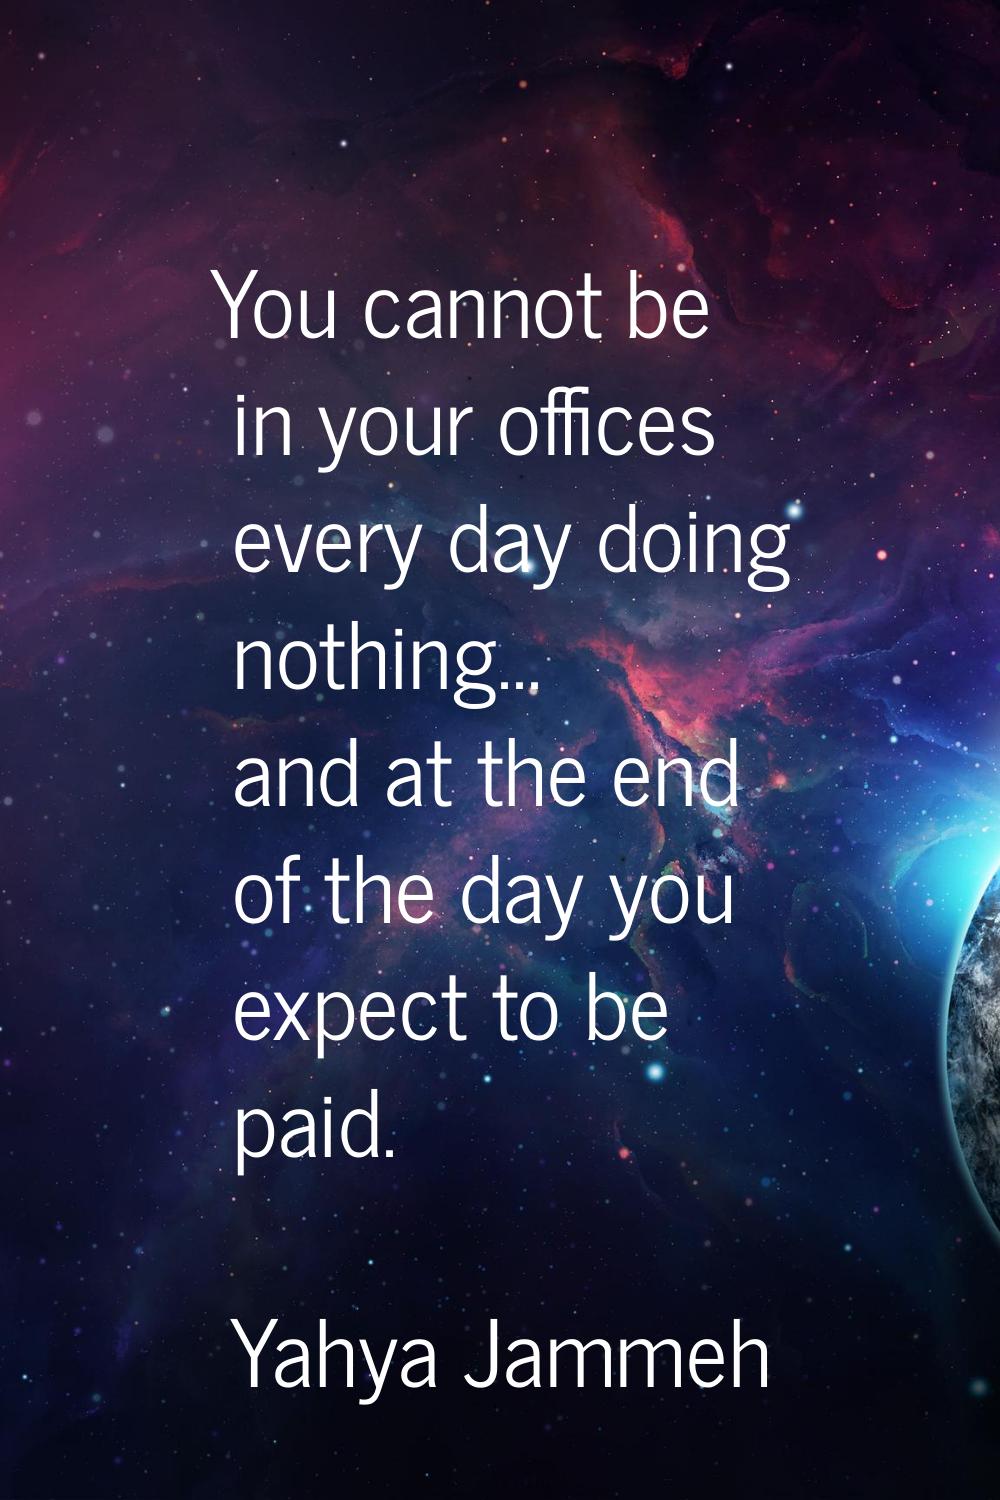 You cannot be in your offices every day doing nothing... and at the end of the day you expect to be